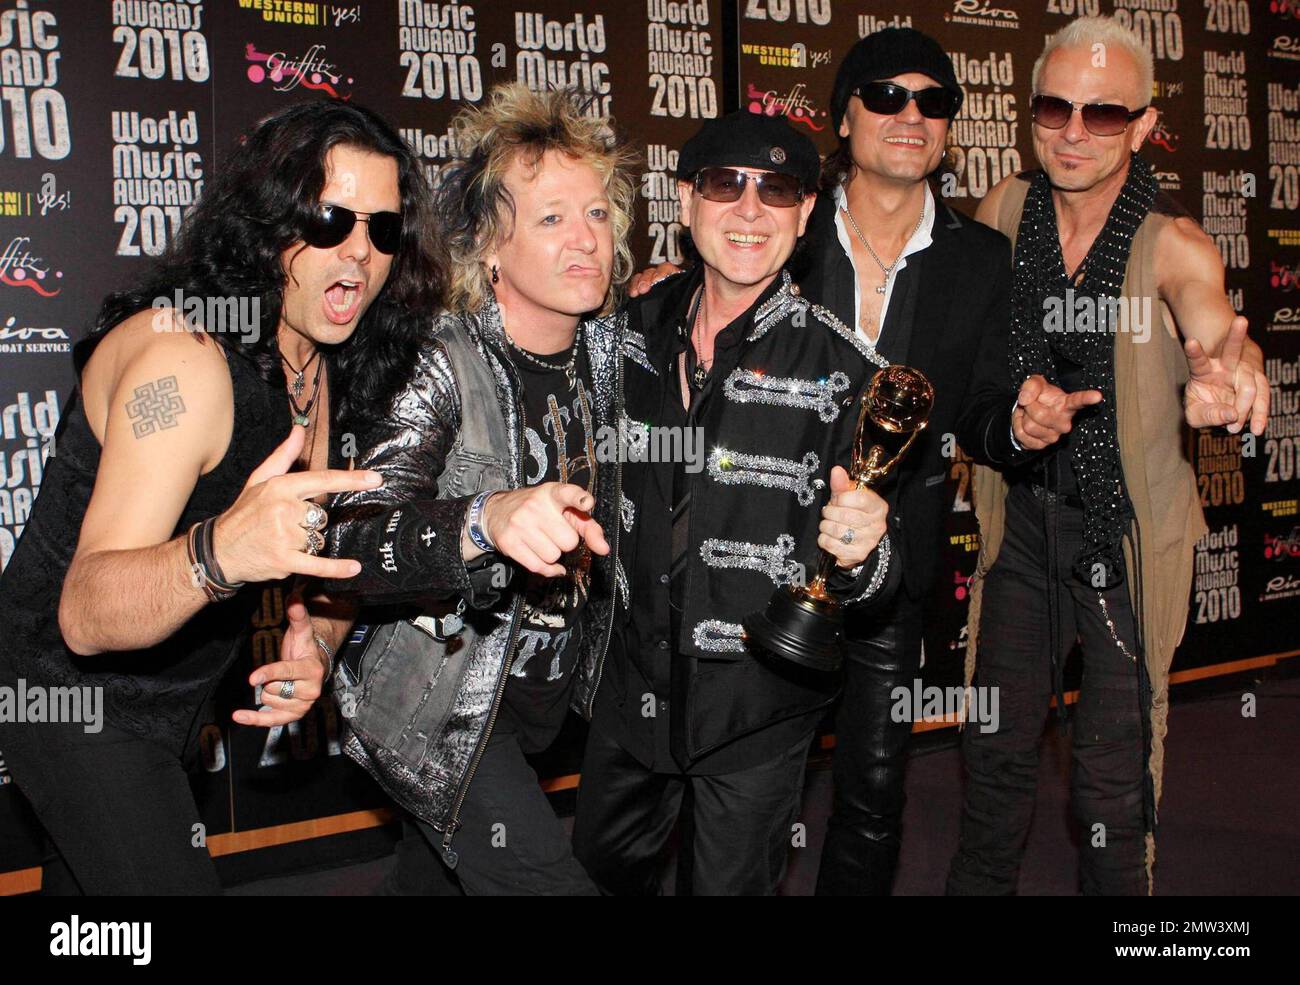 Pawel Maciwoda, James Kottak, Klaus Meine, Matthias Jabs and Rudolf Schenker of the German rock band Scorpions pose with their award at the Sporting Club Monte-Carlo after the annual World Music Awards 2010.  The award show, which was founded in 1989 to honor international recording artists based on worldwide sales figures, was hosted by actresses Michelle Rodriguez and Hayden Panettiere.  Musicians who performed at the event included Jennifer Lopez, Akon, 50 Cent and Scorpions. Monte Carlo, Monaco. 05/18/10.   . Stock Photo